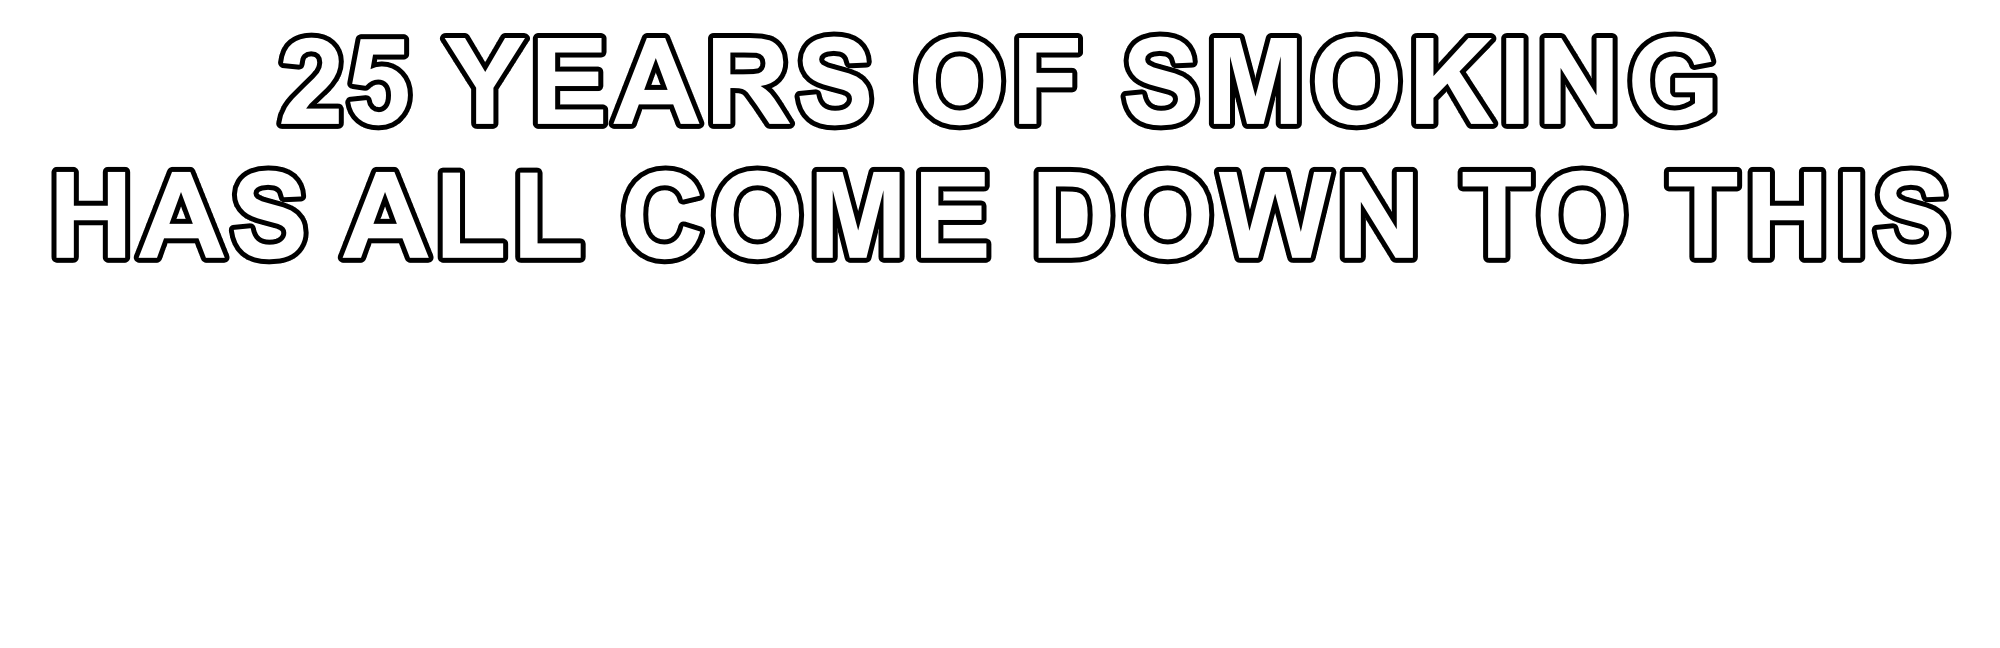 25-Years-of-Smoking-Has-All-Come-Down-to-This